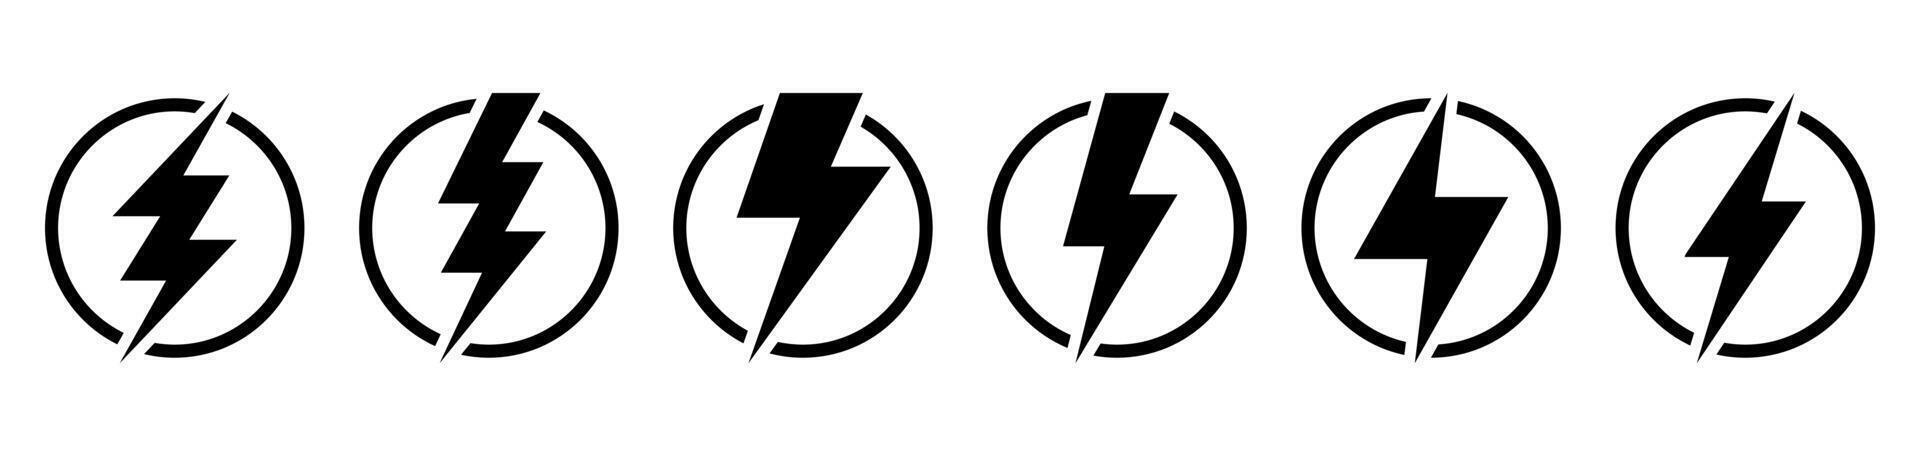 Lightning, electric power icon. Energy and thunder electricity symbol. Lightning bolt sign in the circle. vector